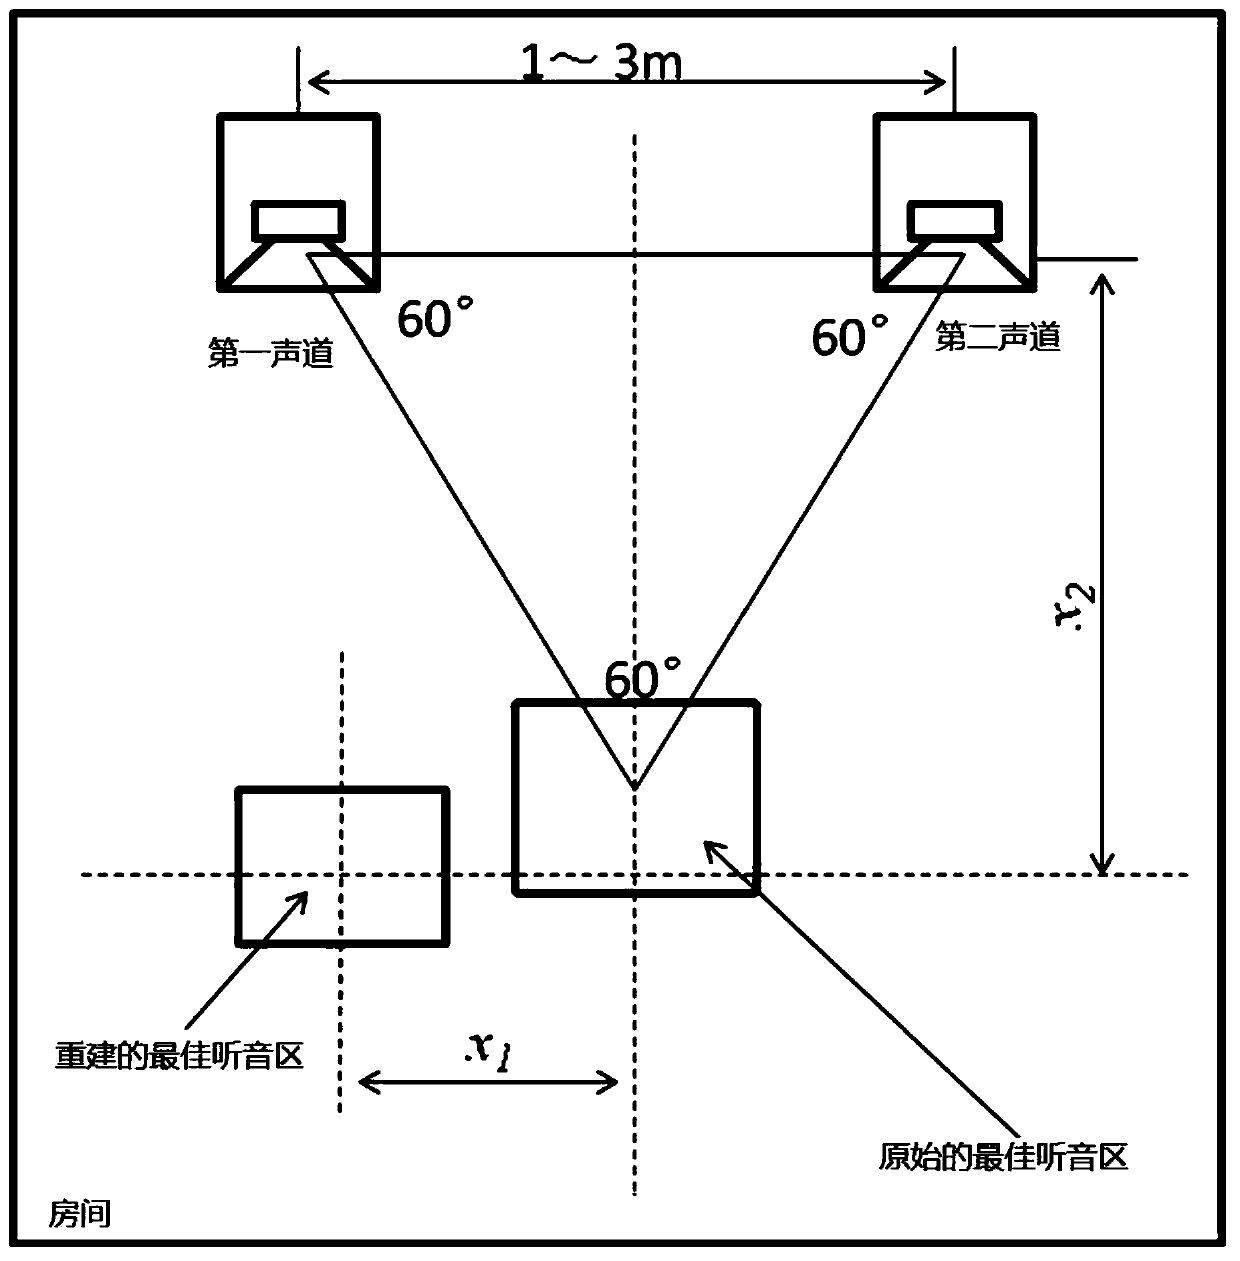 A spatial calibration method of a stereo sound system and its mobile terminal device